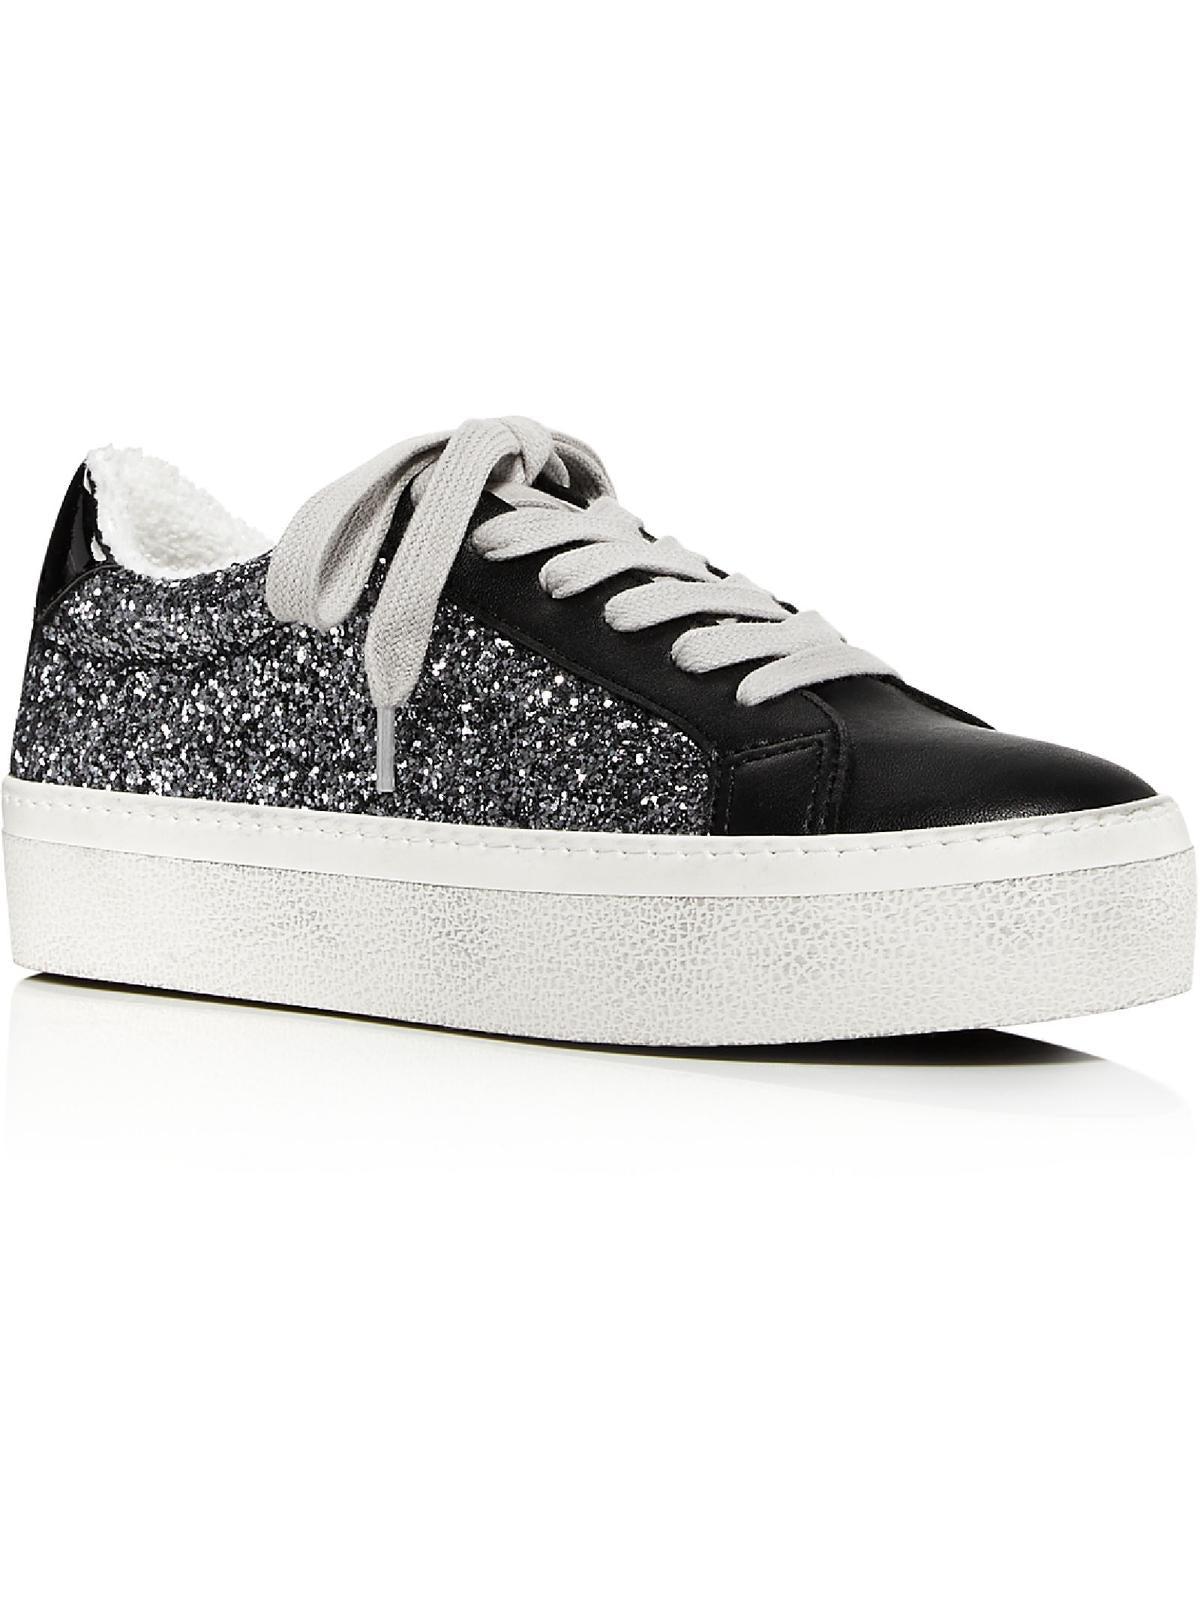 Aqua Play Leather Fashion Sneakers in Black | Lyst